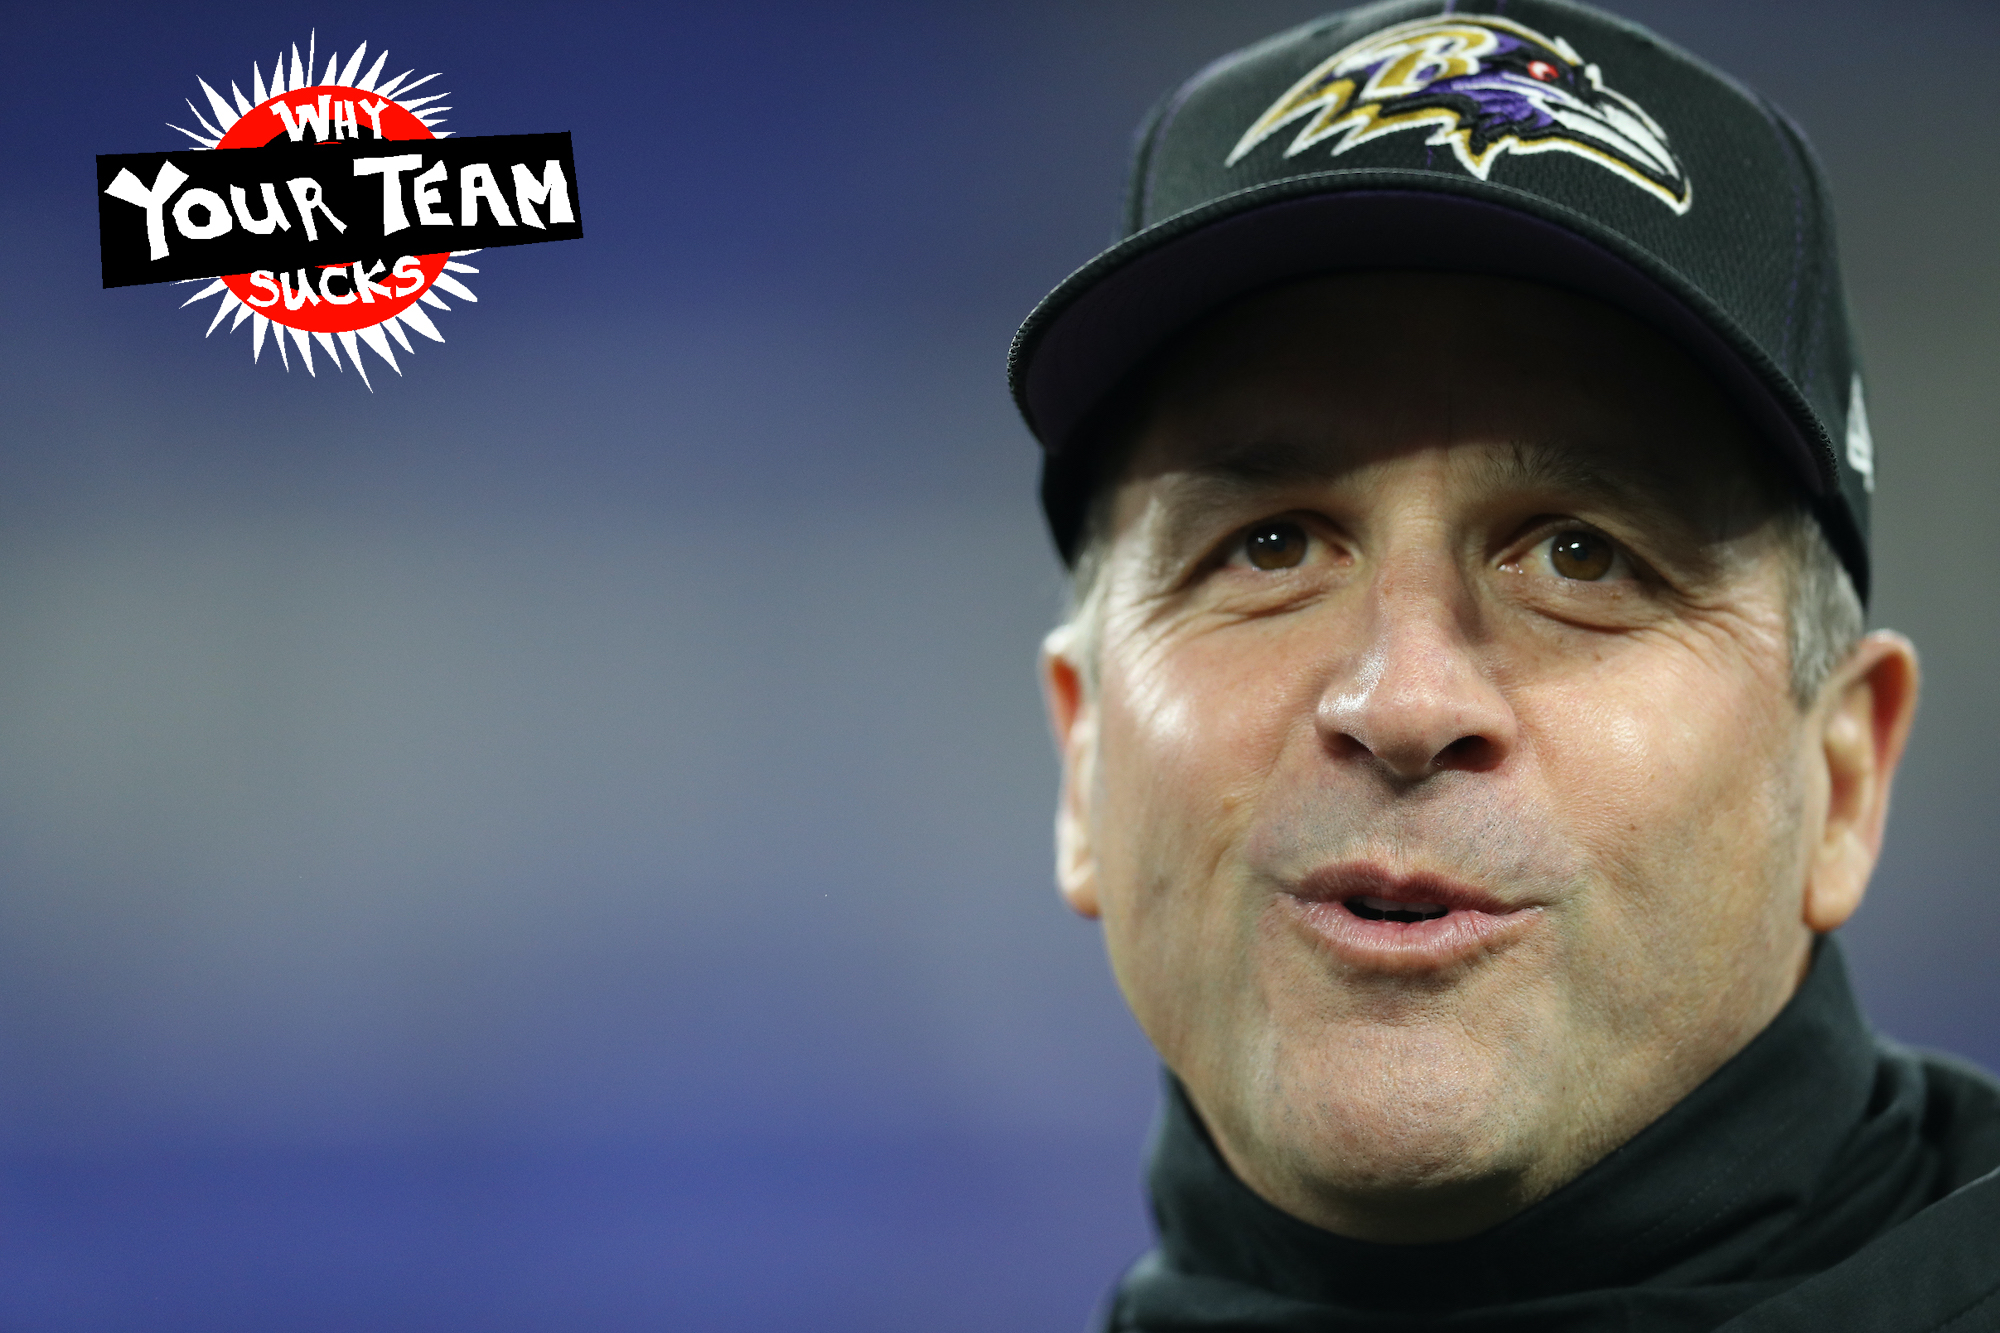 BALTIMORE, MARYLAND - DECEMBER 12: Head coach John Harbaugh of the Baltimore Ravens prepares with the team before the game against the New York Jets at M&amp;T Bank Stadium on December 12, 2019 in Baltimore, Maryland. (Photo by Patrick Smith/Getty Images)